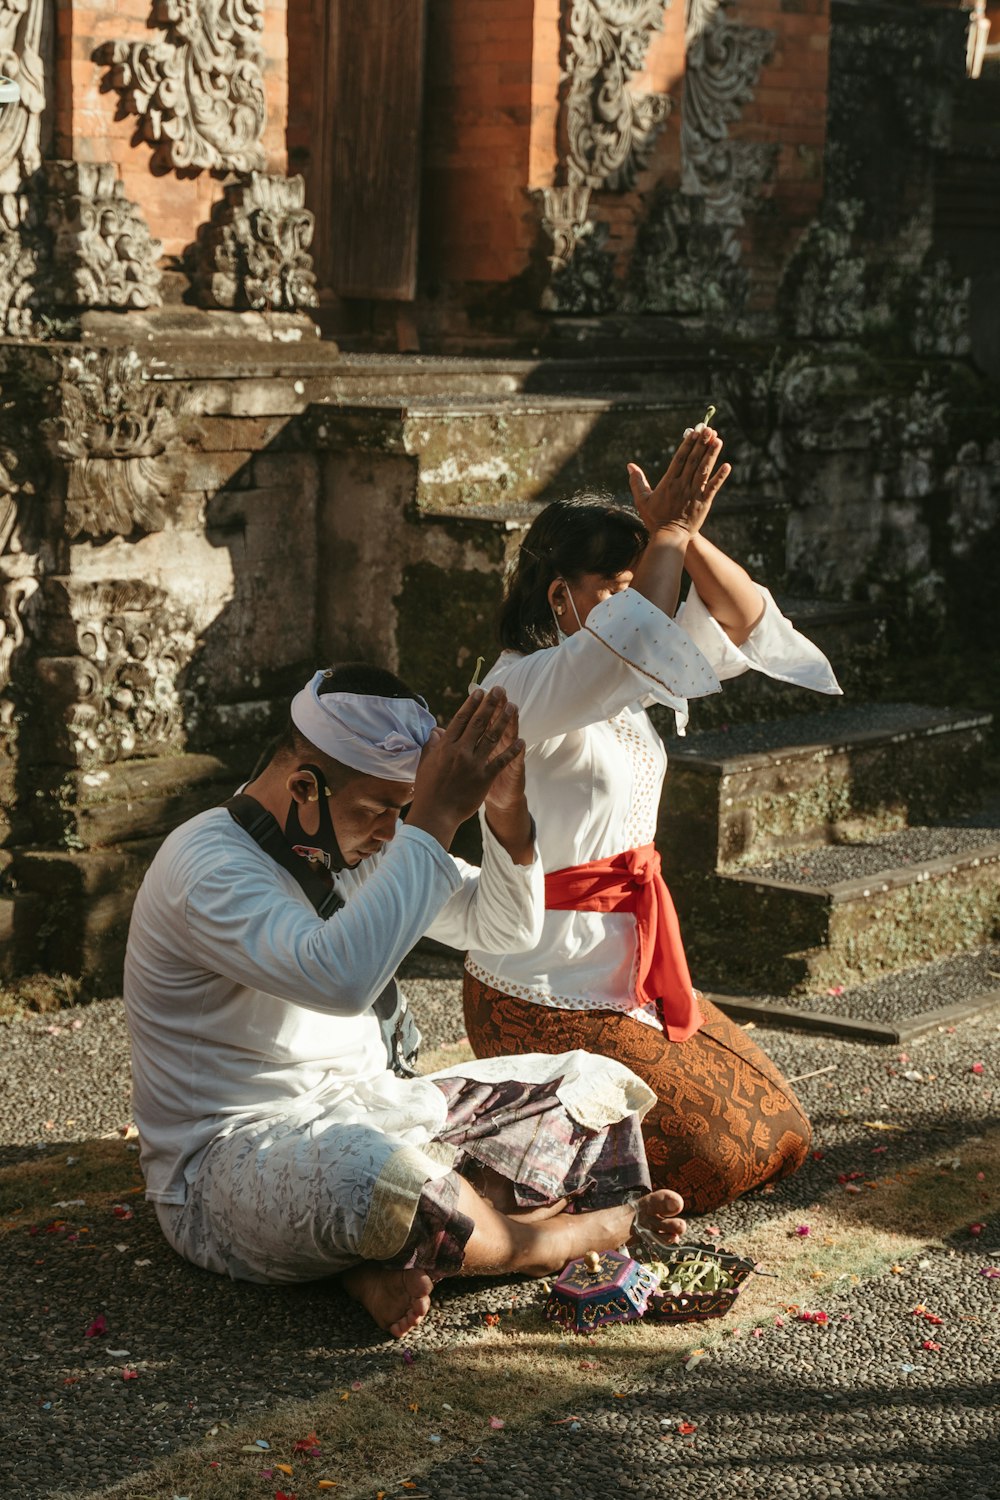 a man kneeling down next to a woman on the ground